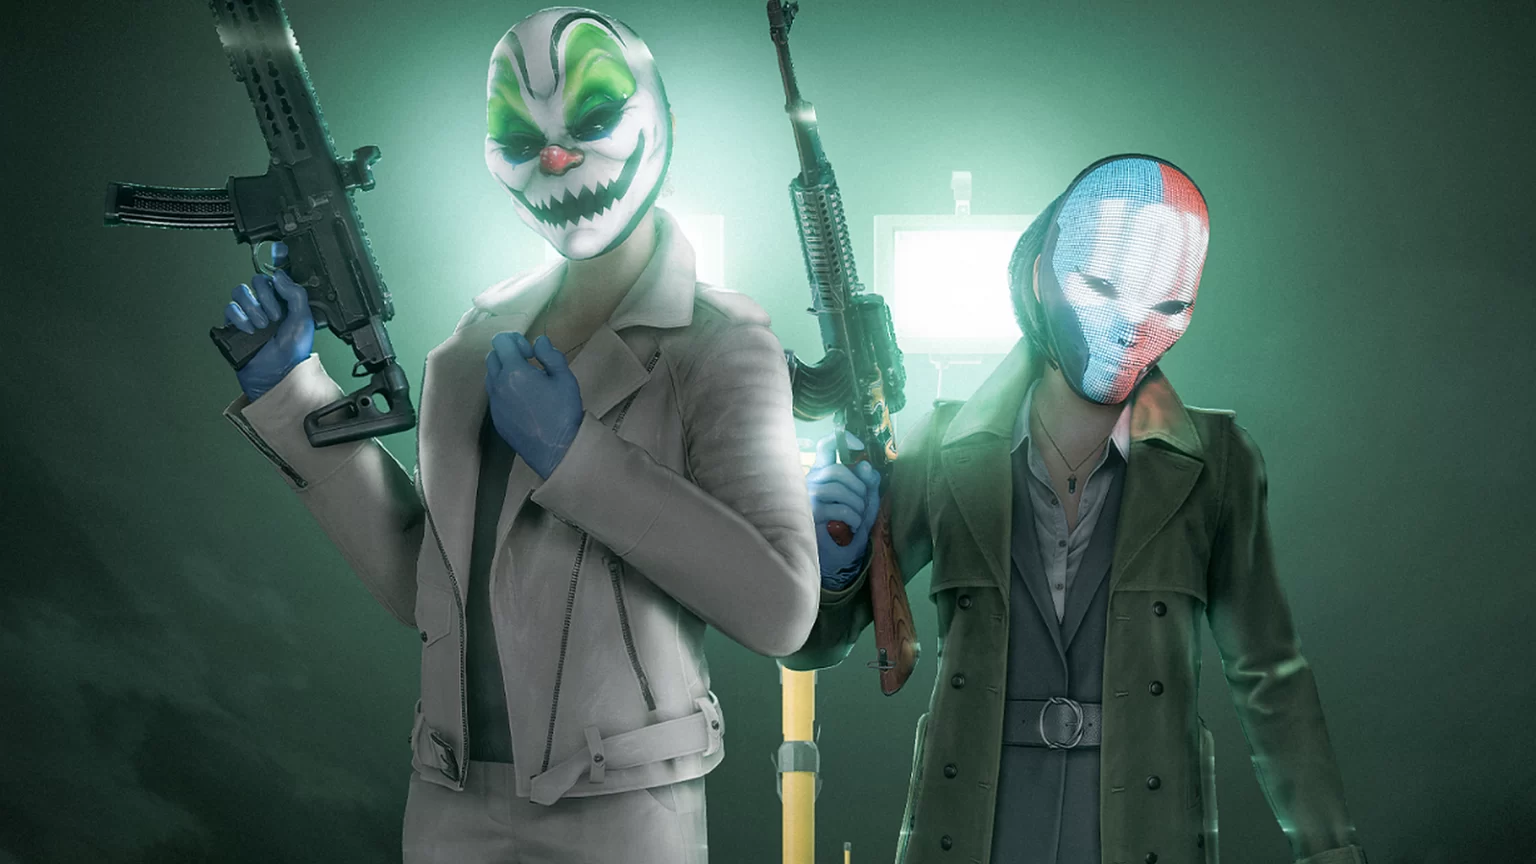 Payday 3